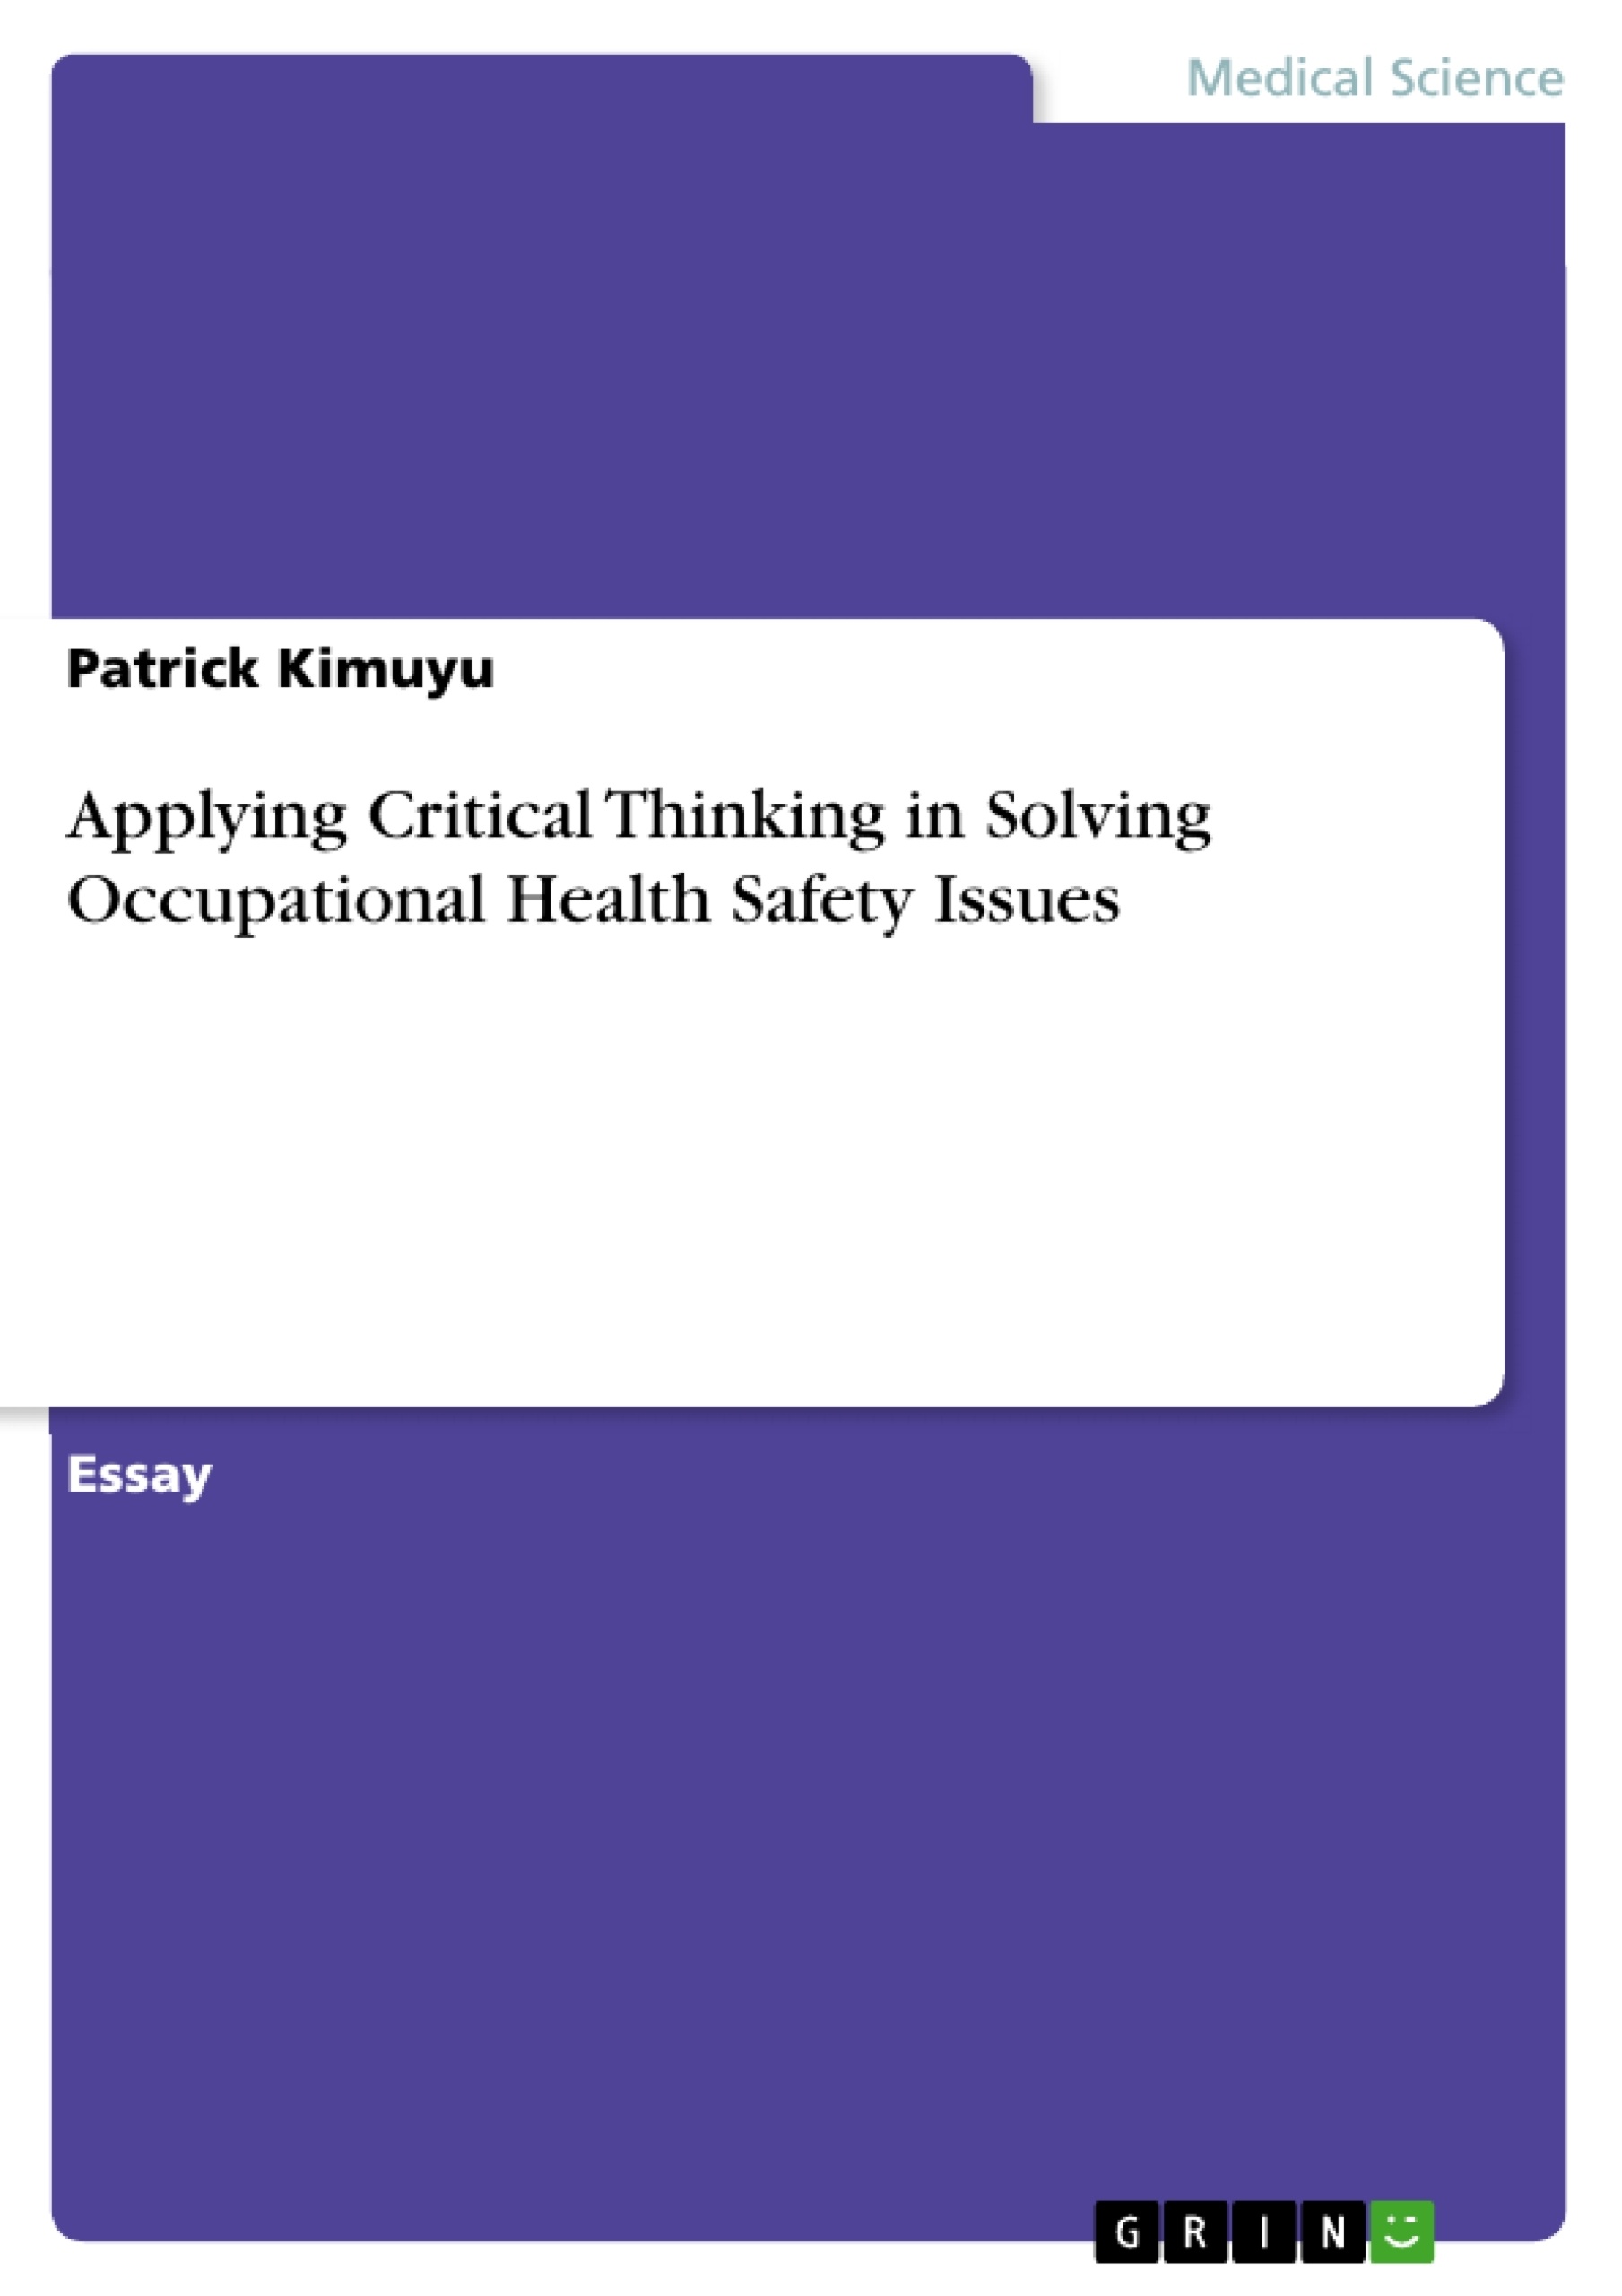 Titre: Applying Critical Thinking in Solving Occupational Health Safety Issues